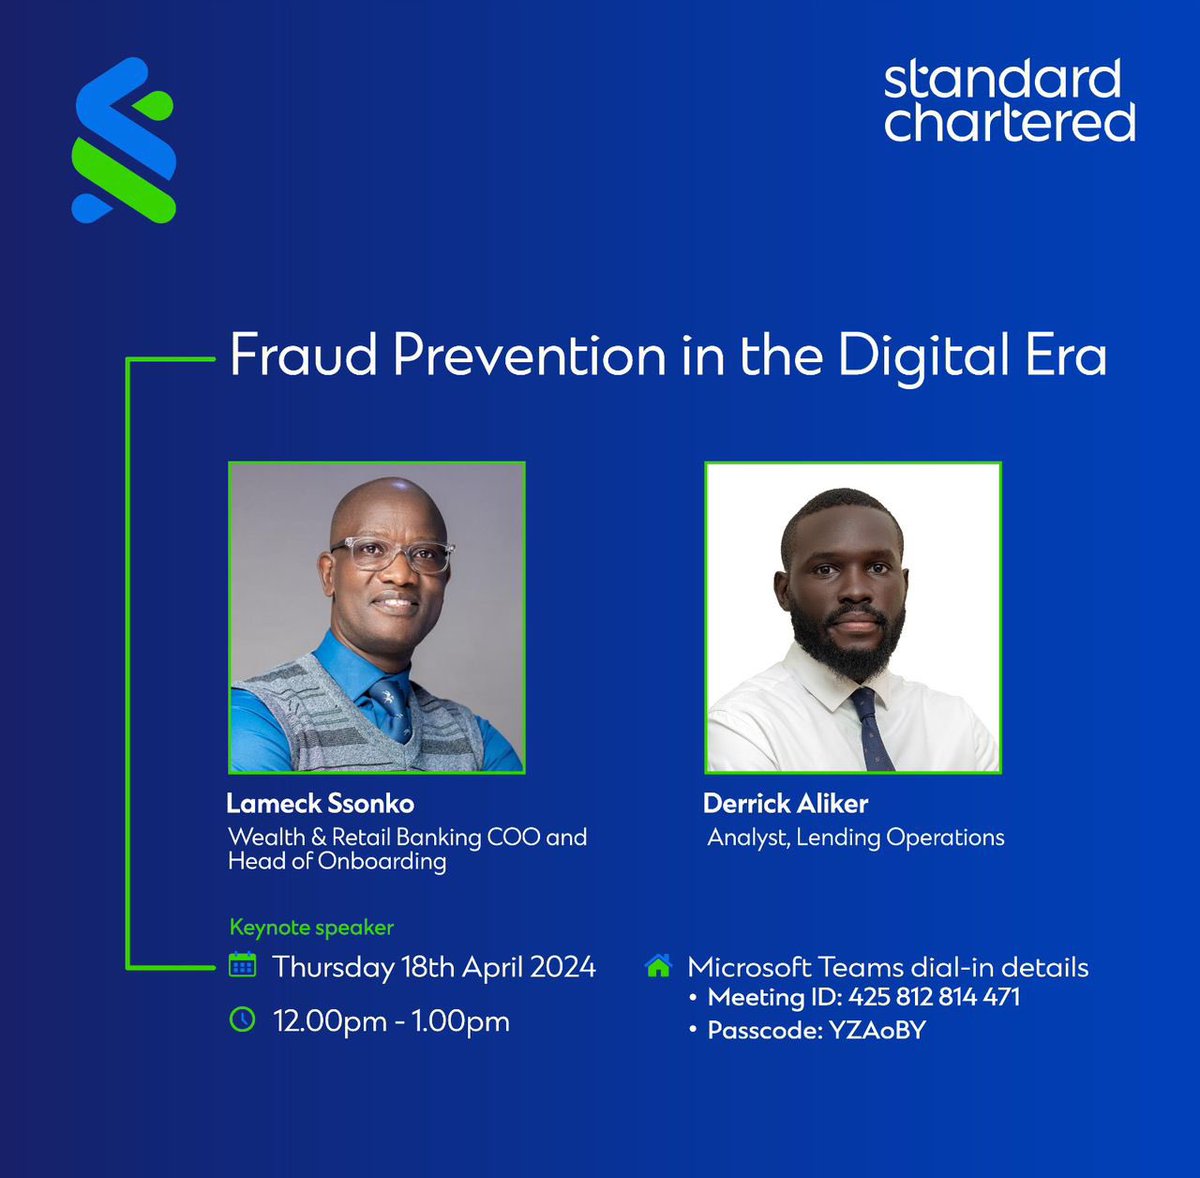 Y’all join us in the educational webinar about Fraud Prevention in the Digital Era with Mr Lameck and Mr Derrick Aliker from @StanChartUGA 

Today from 12-1pm🥳

Meeting ID: 425812814 471
Passcode: YZAoBY

#HereForGood 
#Webinar